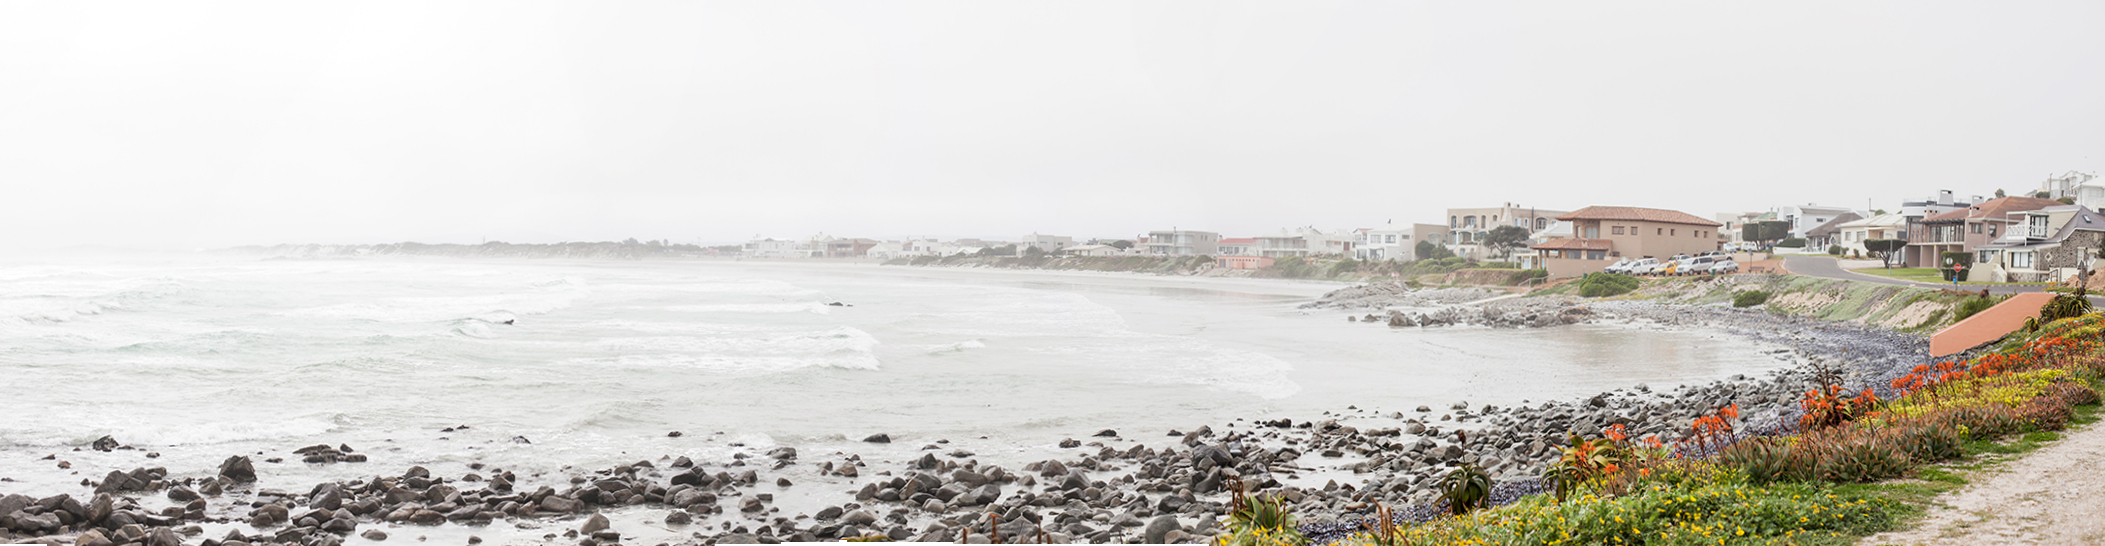 Panoramic view of Yzerfontein, South Africa.